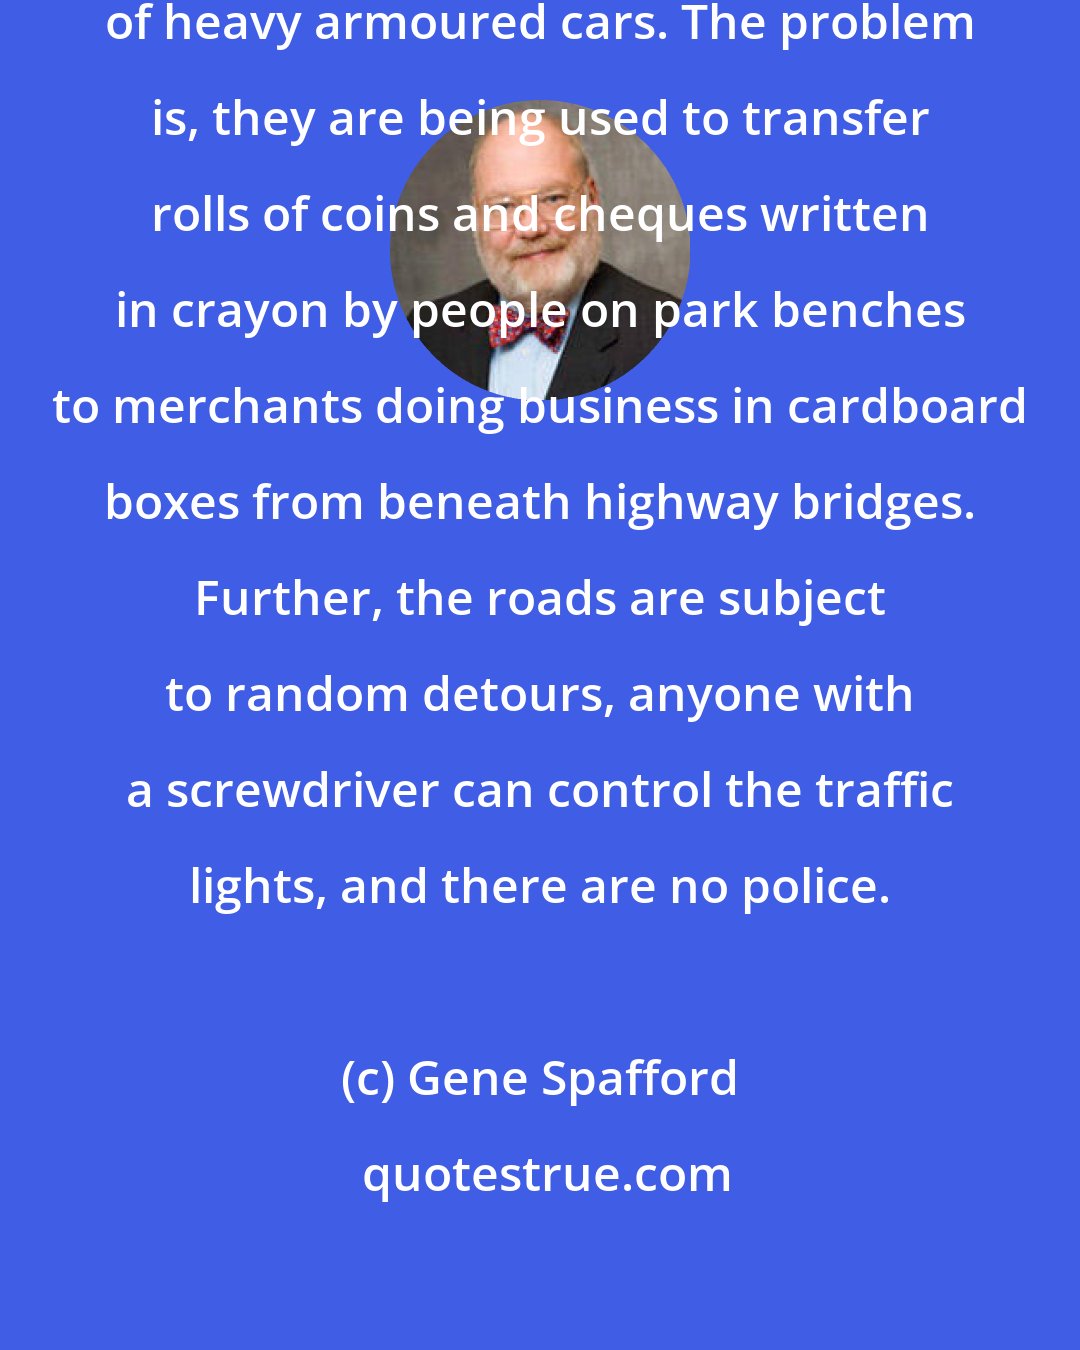 Gene Spafford: Secure web servers are the equivalent of heavy armoured cars. The problem is, they are being used to transfer rolls of coins and cheques written in crayon by people on park benches to merchants doing business in cardboard boxes from beneath highway bridges. Further, the roads are subject to random detours, anyone with a screwdriver can control the traffic lights, and there are no police.